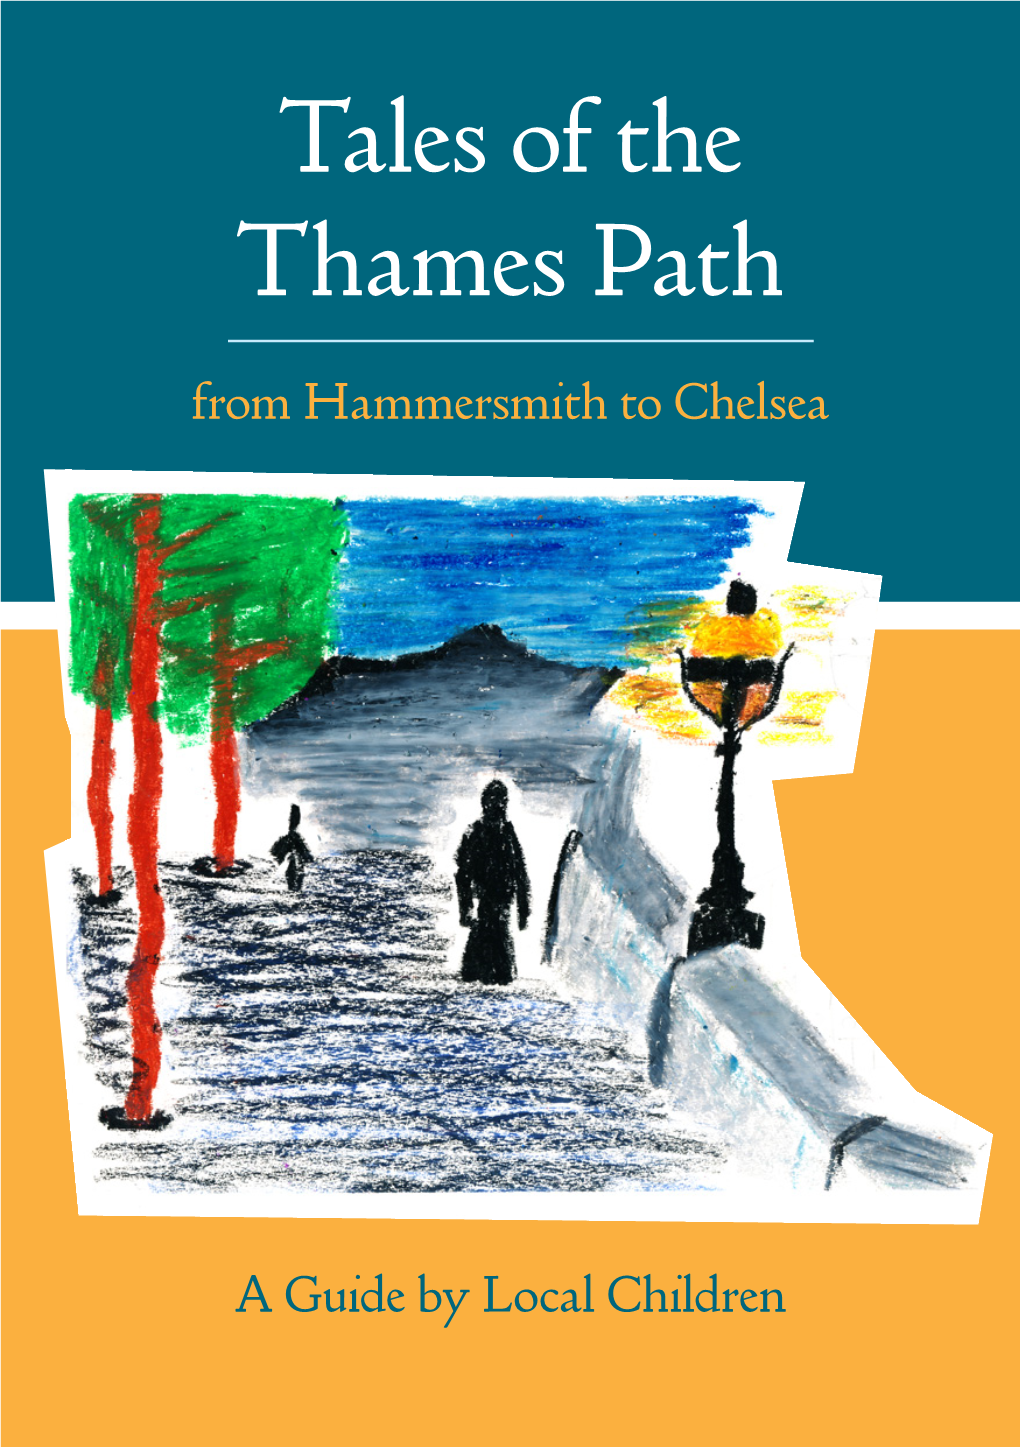 Tales of the Thames Path from Hammersmith to Chelsea